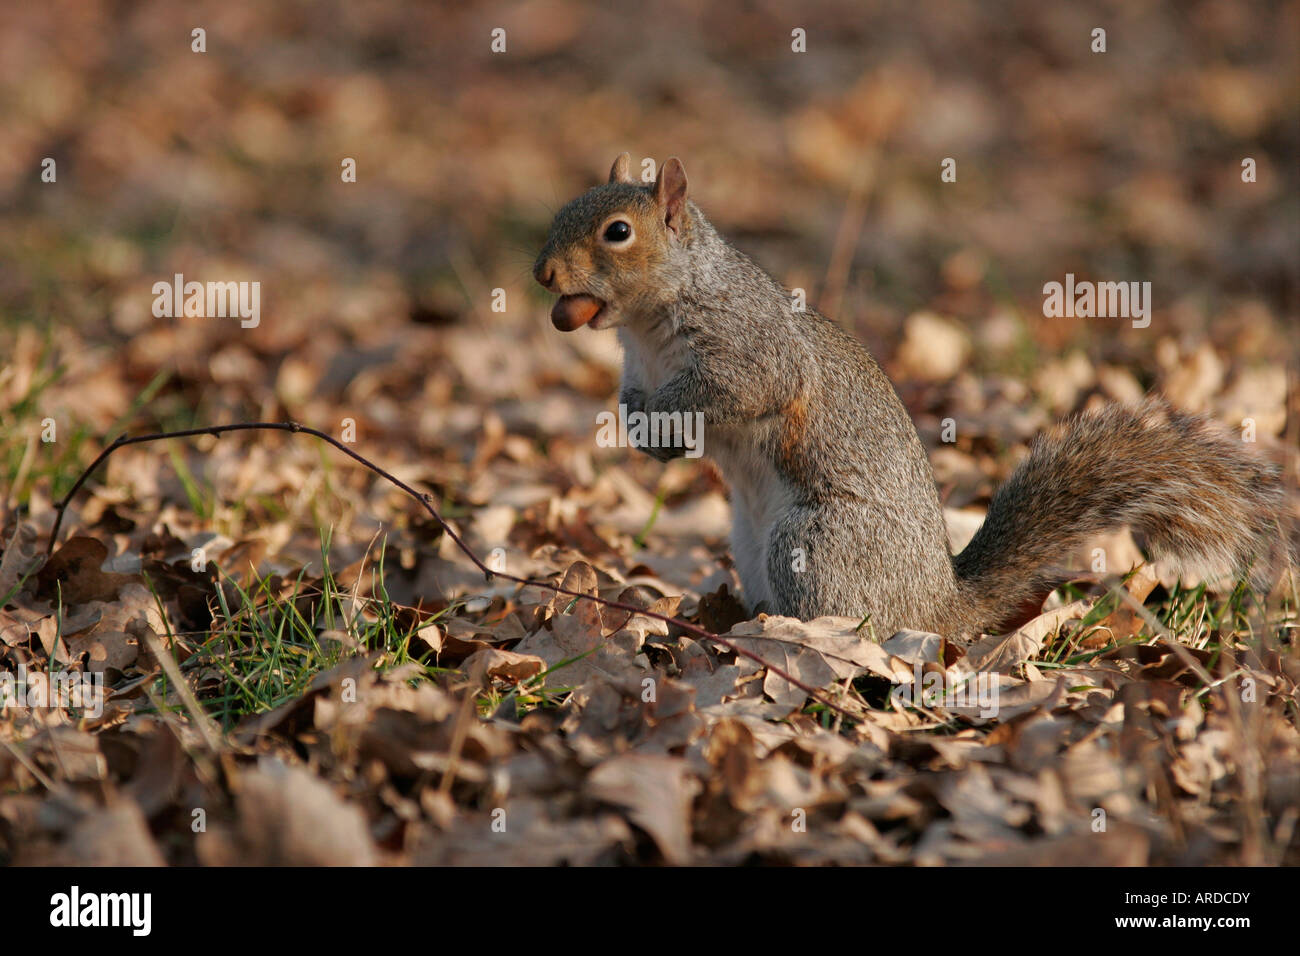 Squirrel with an acorn in the mouth Stock Photo